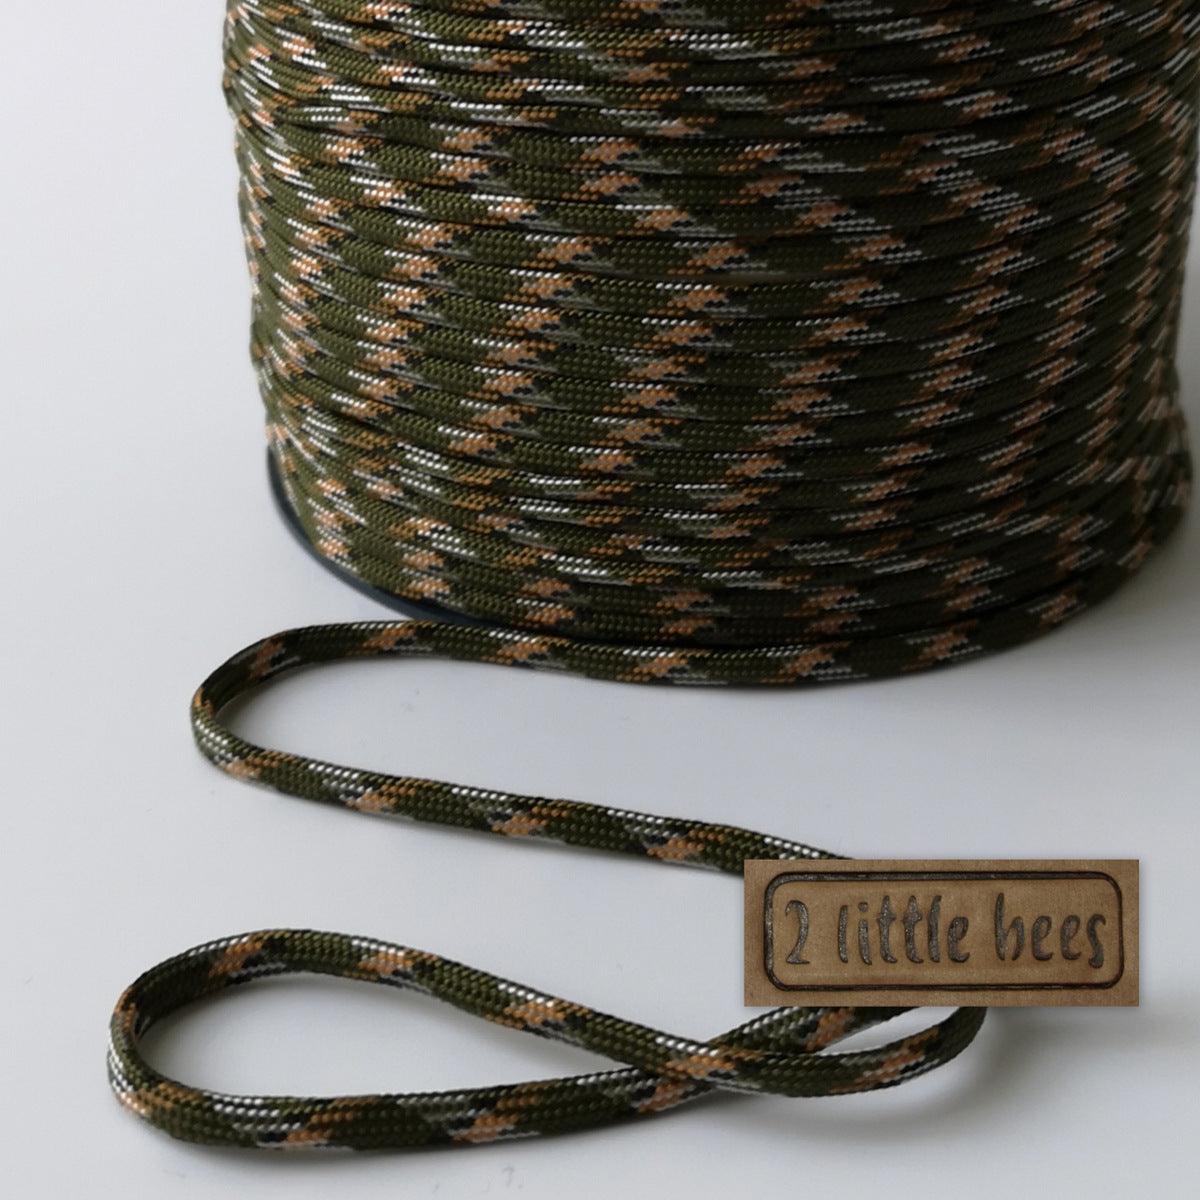 4mm camouflage paracord. Extra strong cord – 2 little bees